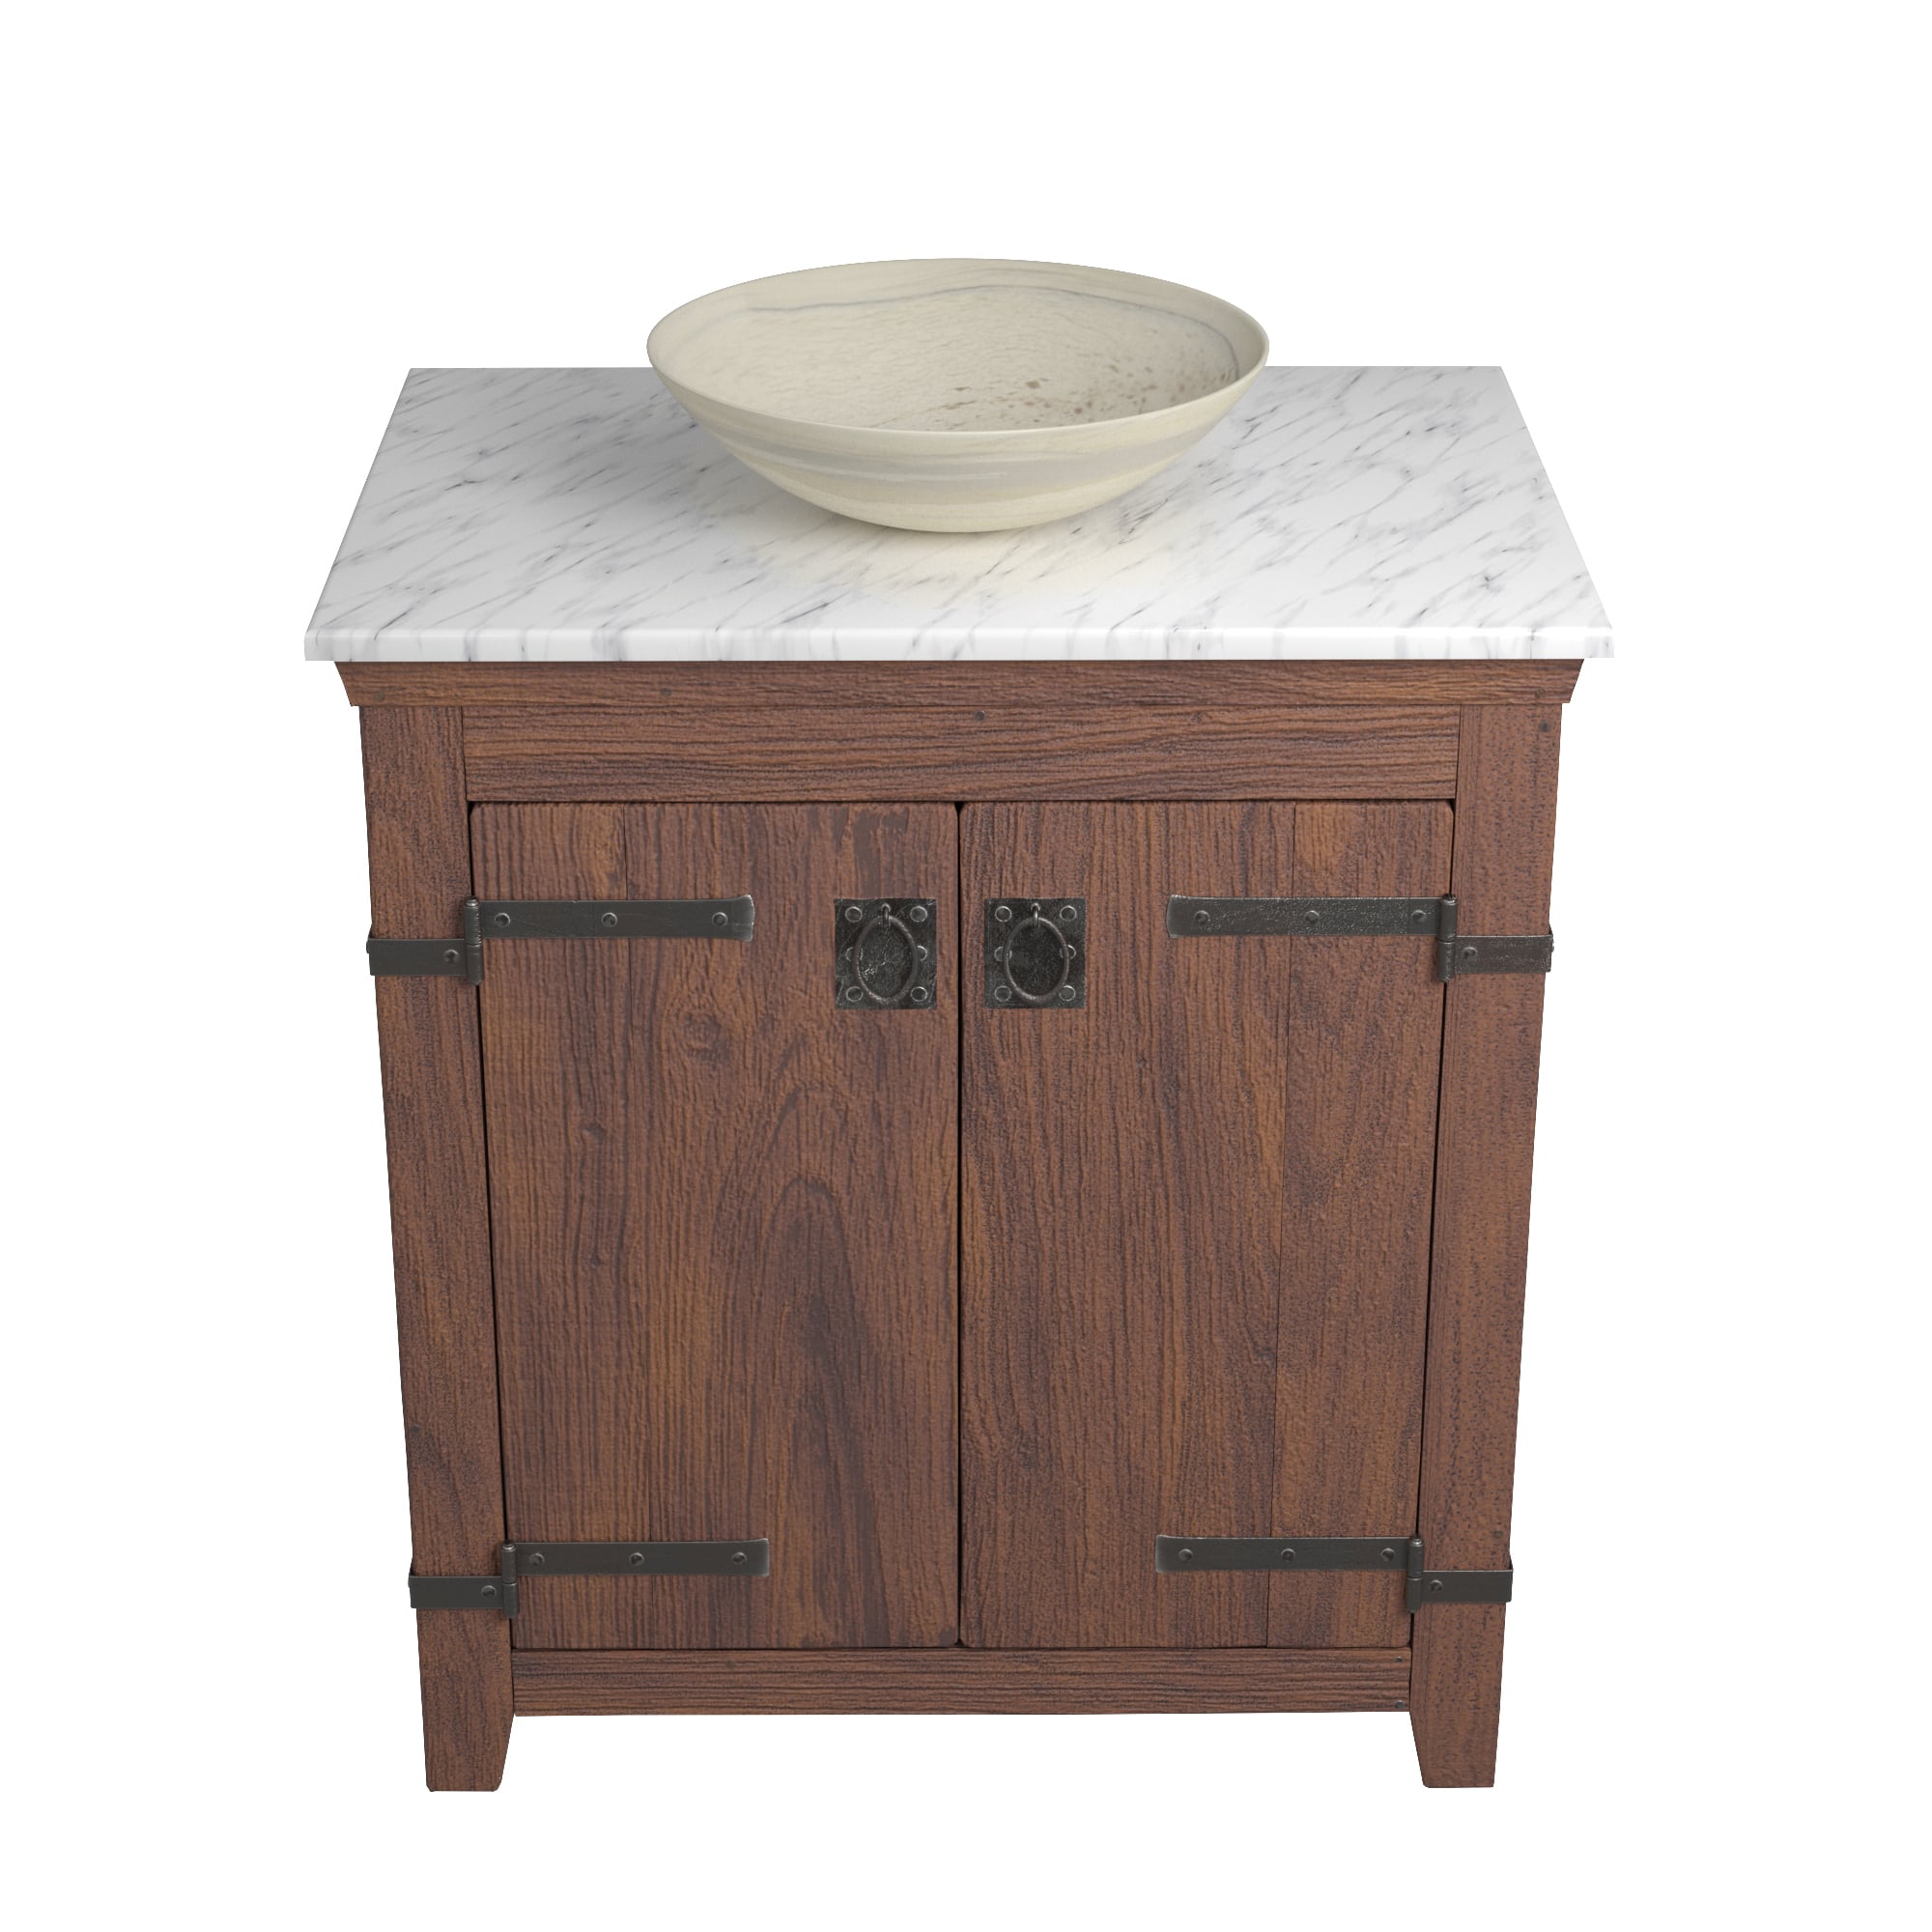 Native Trails 30" Americana Vanity in Chestnut with Carrara Marble Top and Verona in Beachcomber, No Faucet Hole, BND30-VB-CT-MG-084